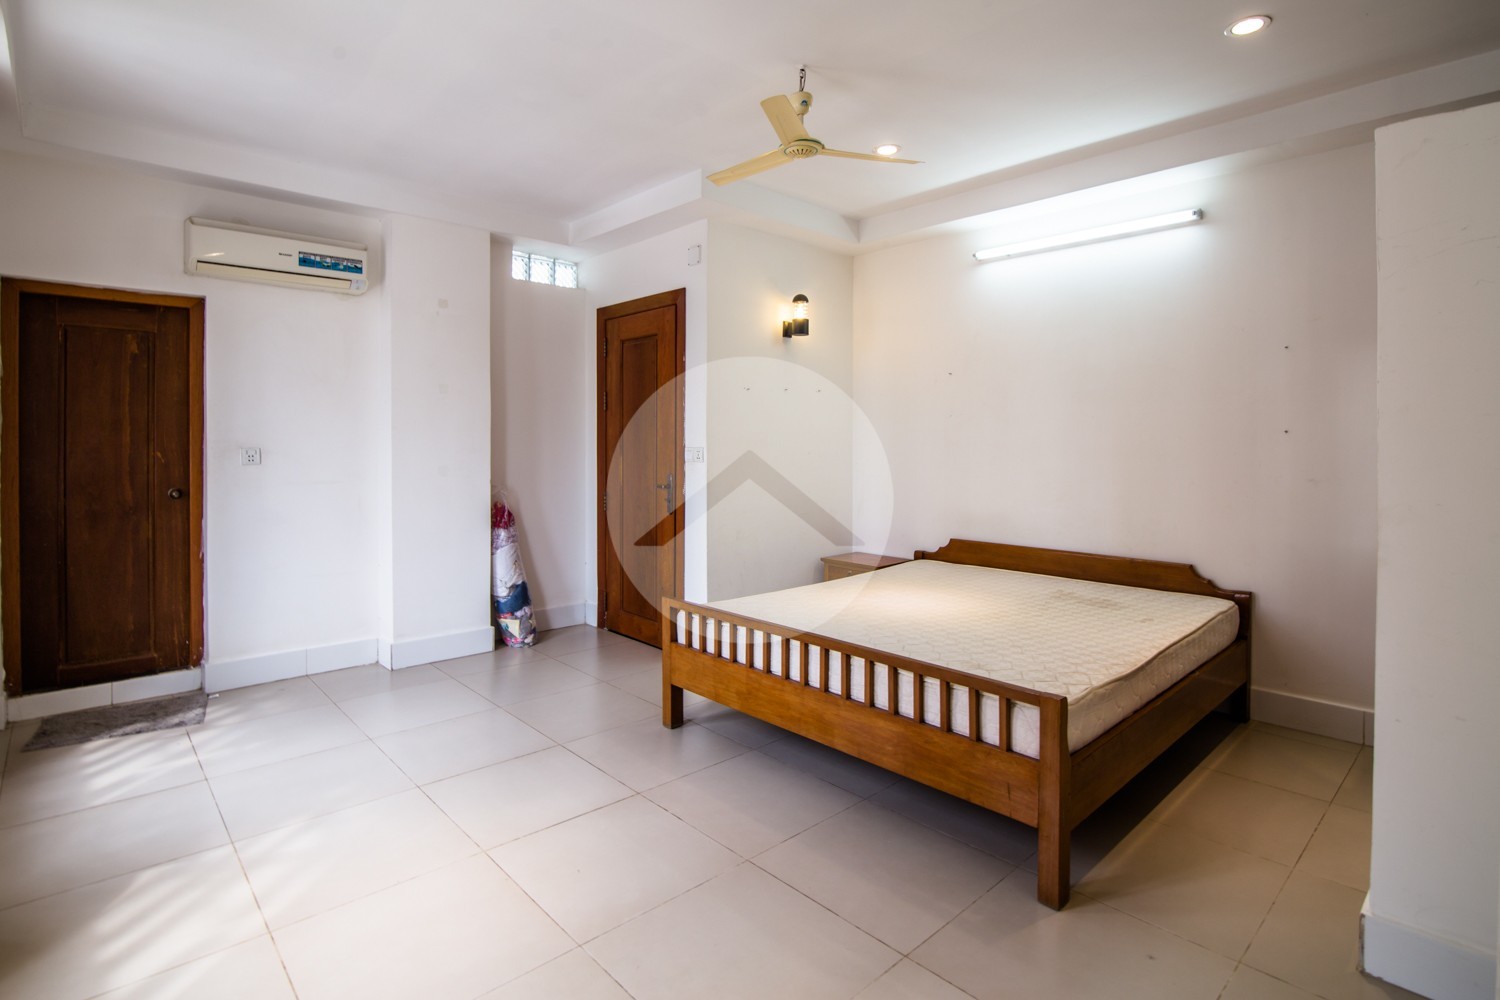 2 Bedroom Apartment For Rent in Russian Market - Phnom Penh  thumbnail